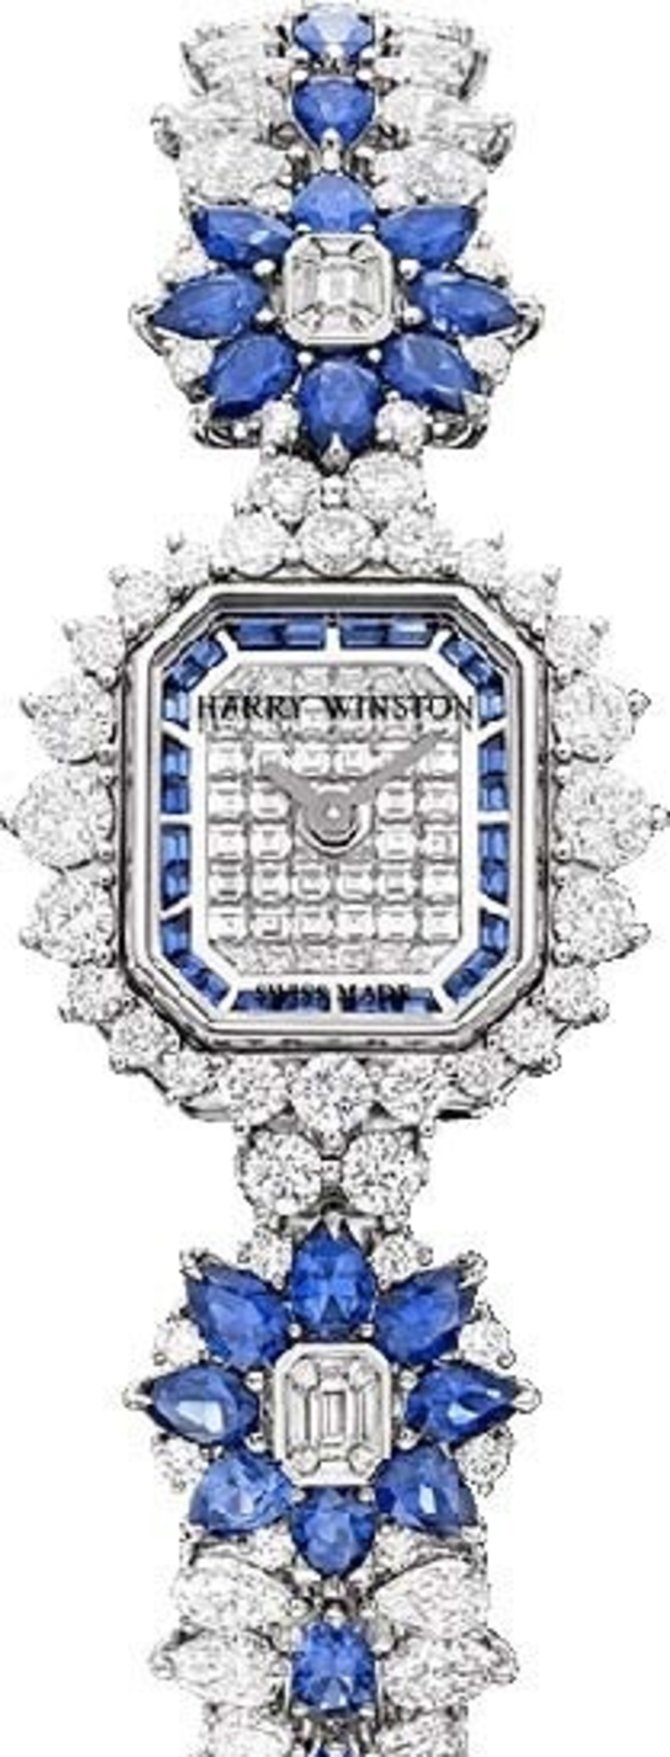 Harry Winston HJTQHM14PP004 High Jewelry Jewels That Tell Time Marble Marquetry